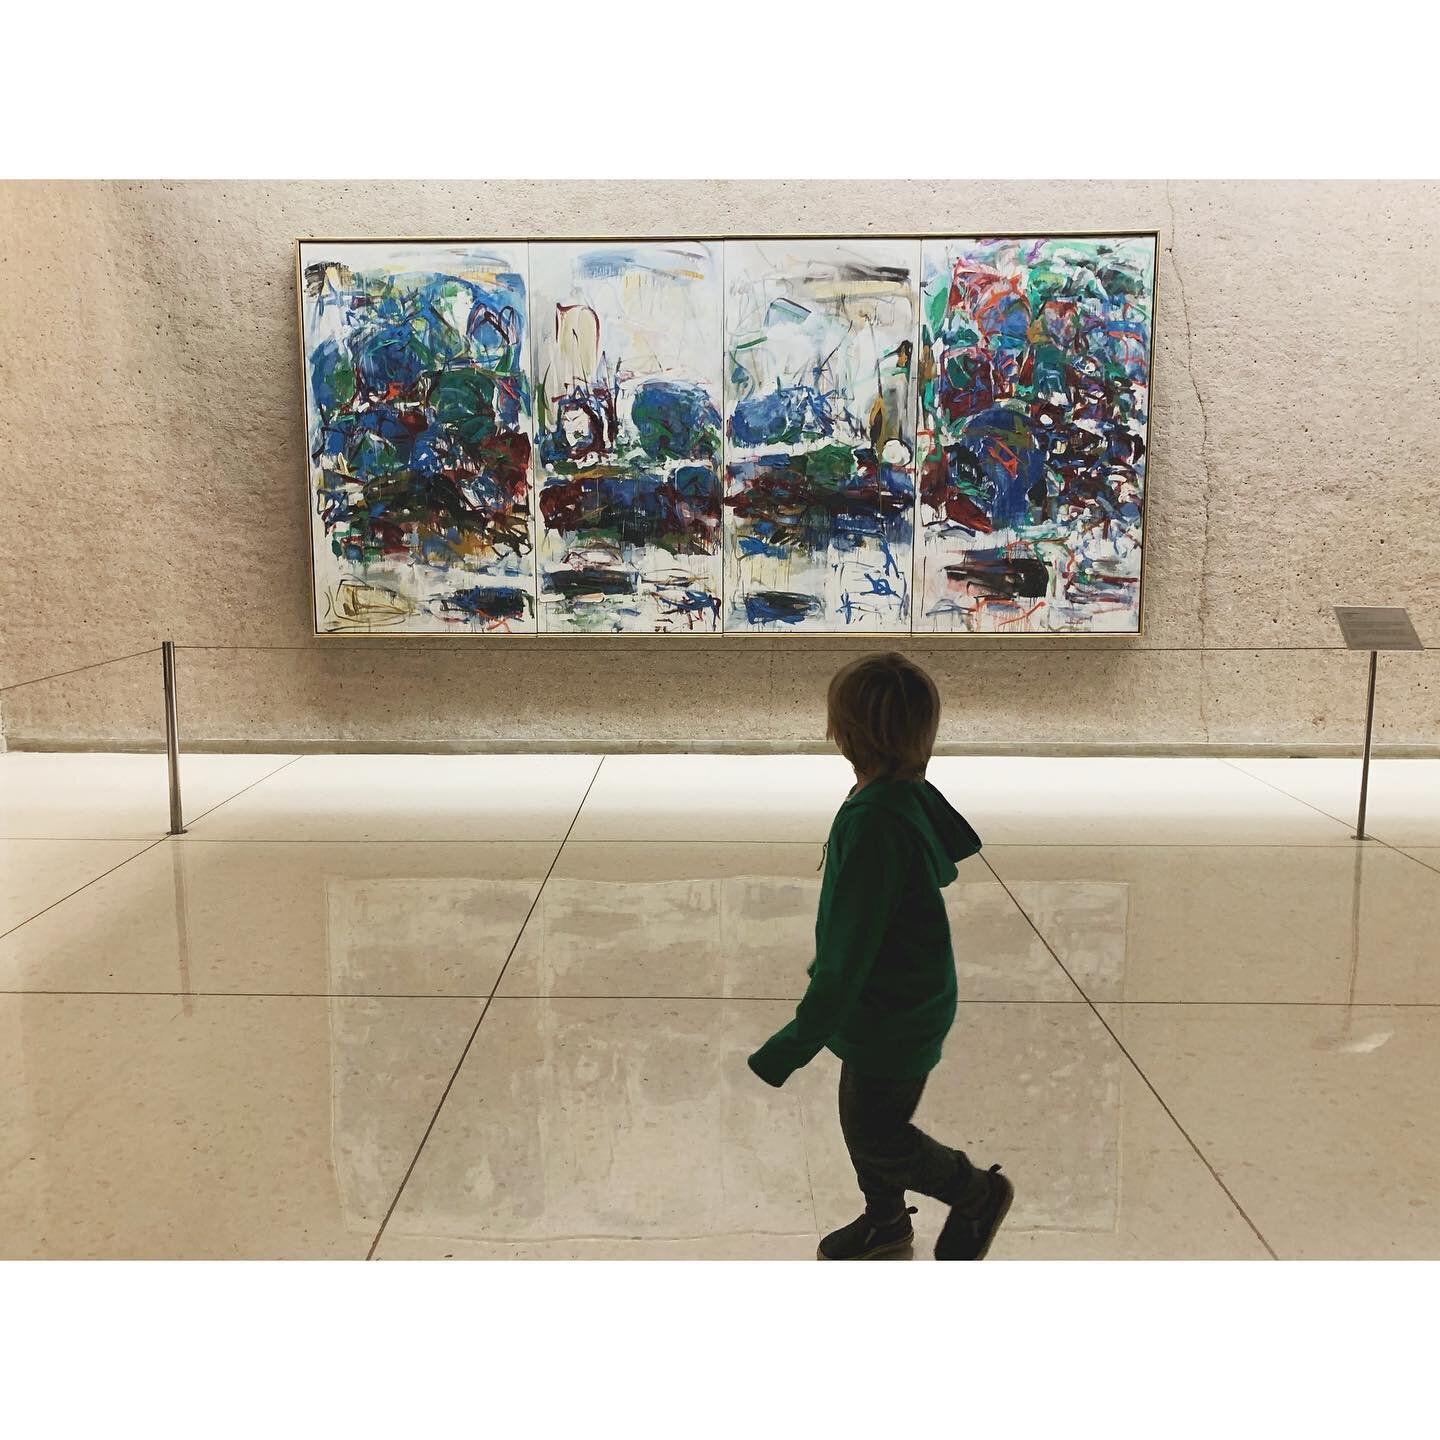 Visiting Joan Mitchell in the Corning Tower